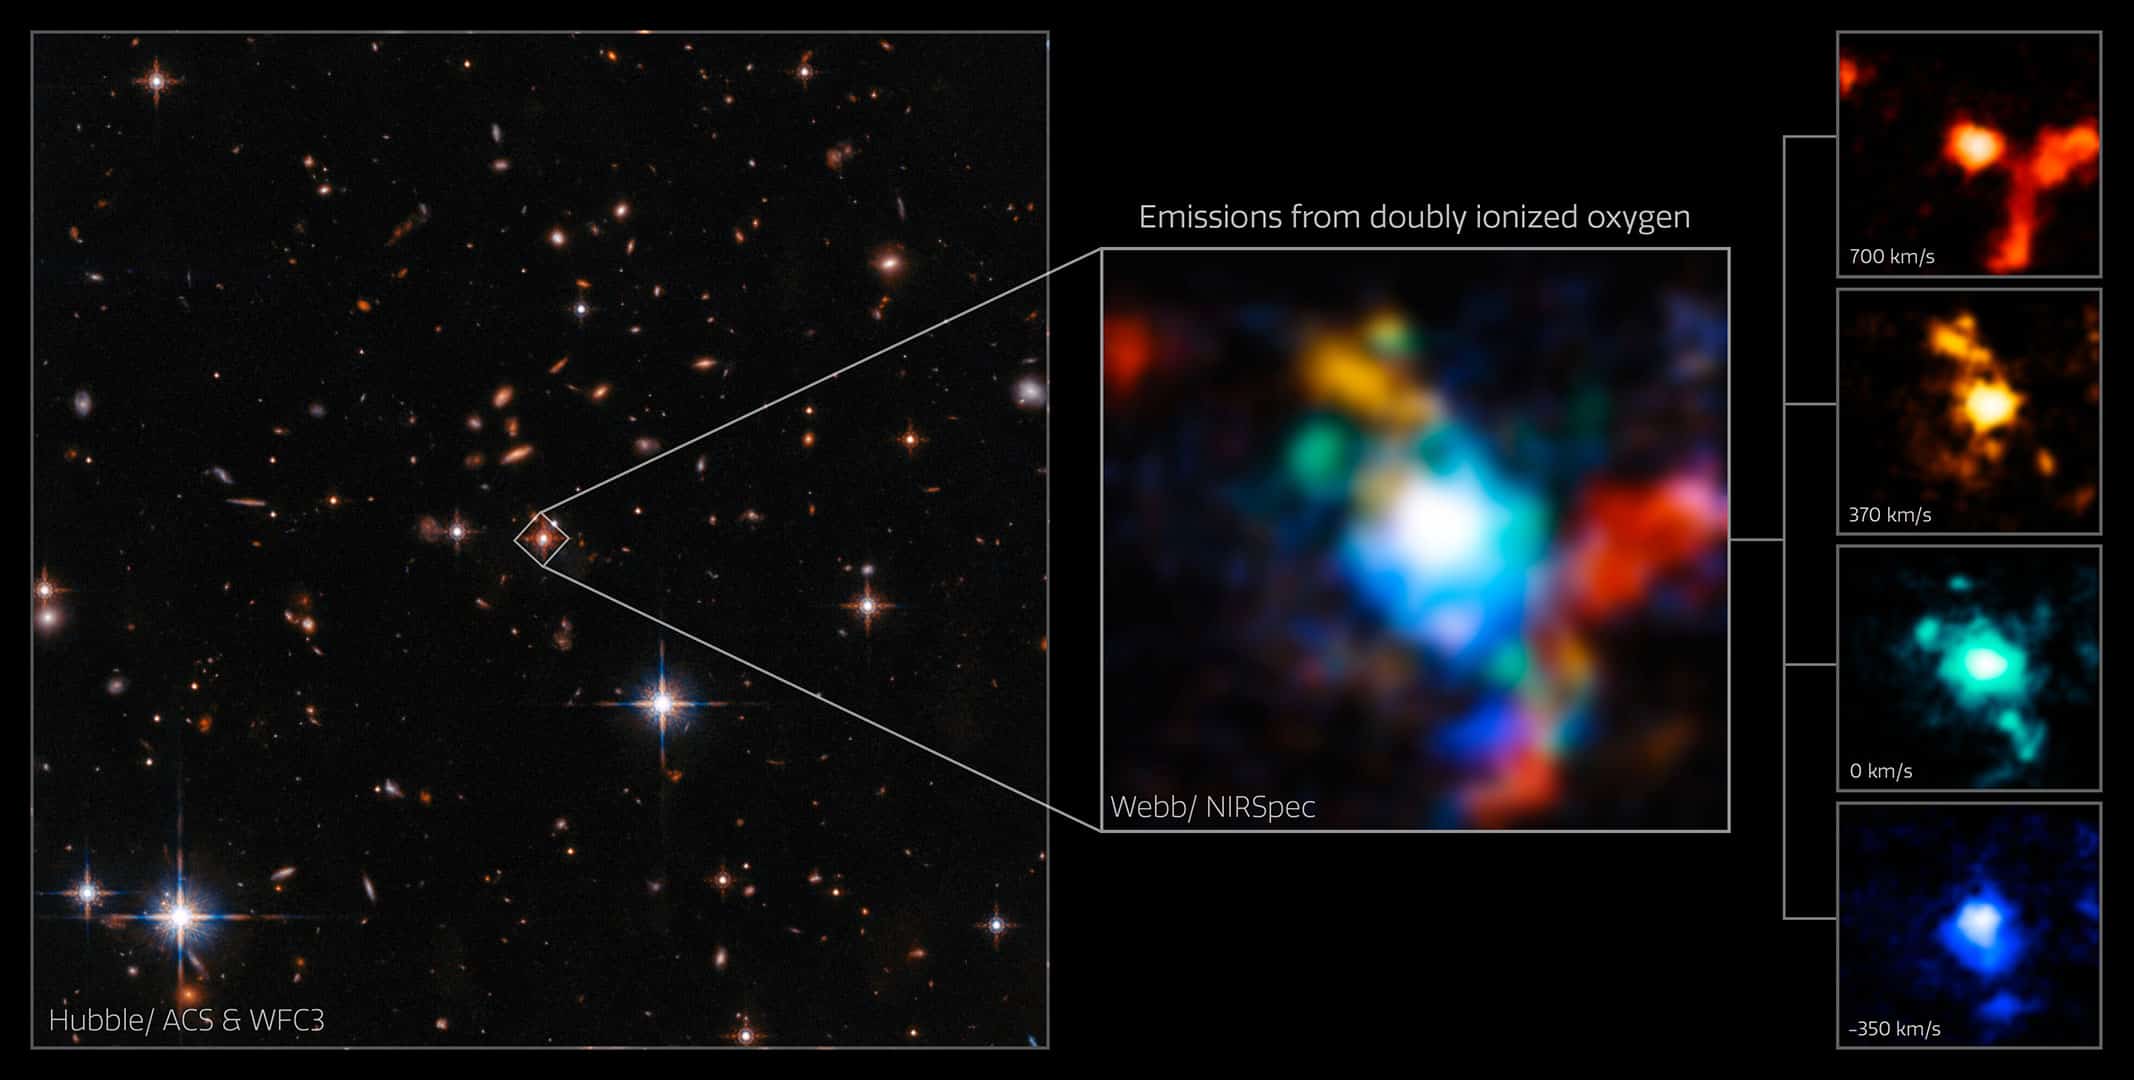 Webb's View Around the Extremely Red Quasar SDSS J165202.64+172852.3